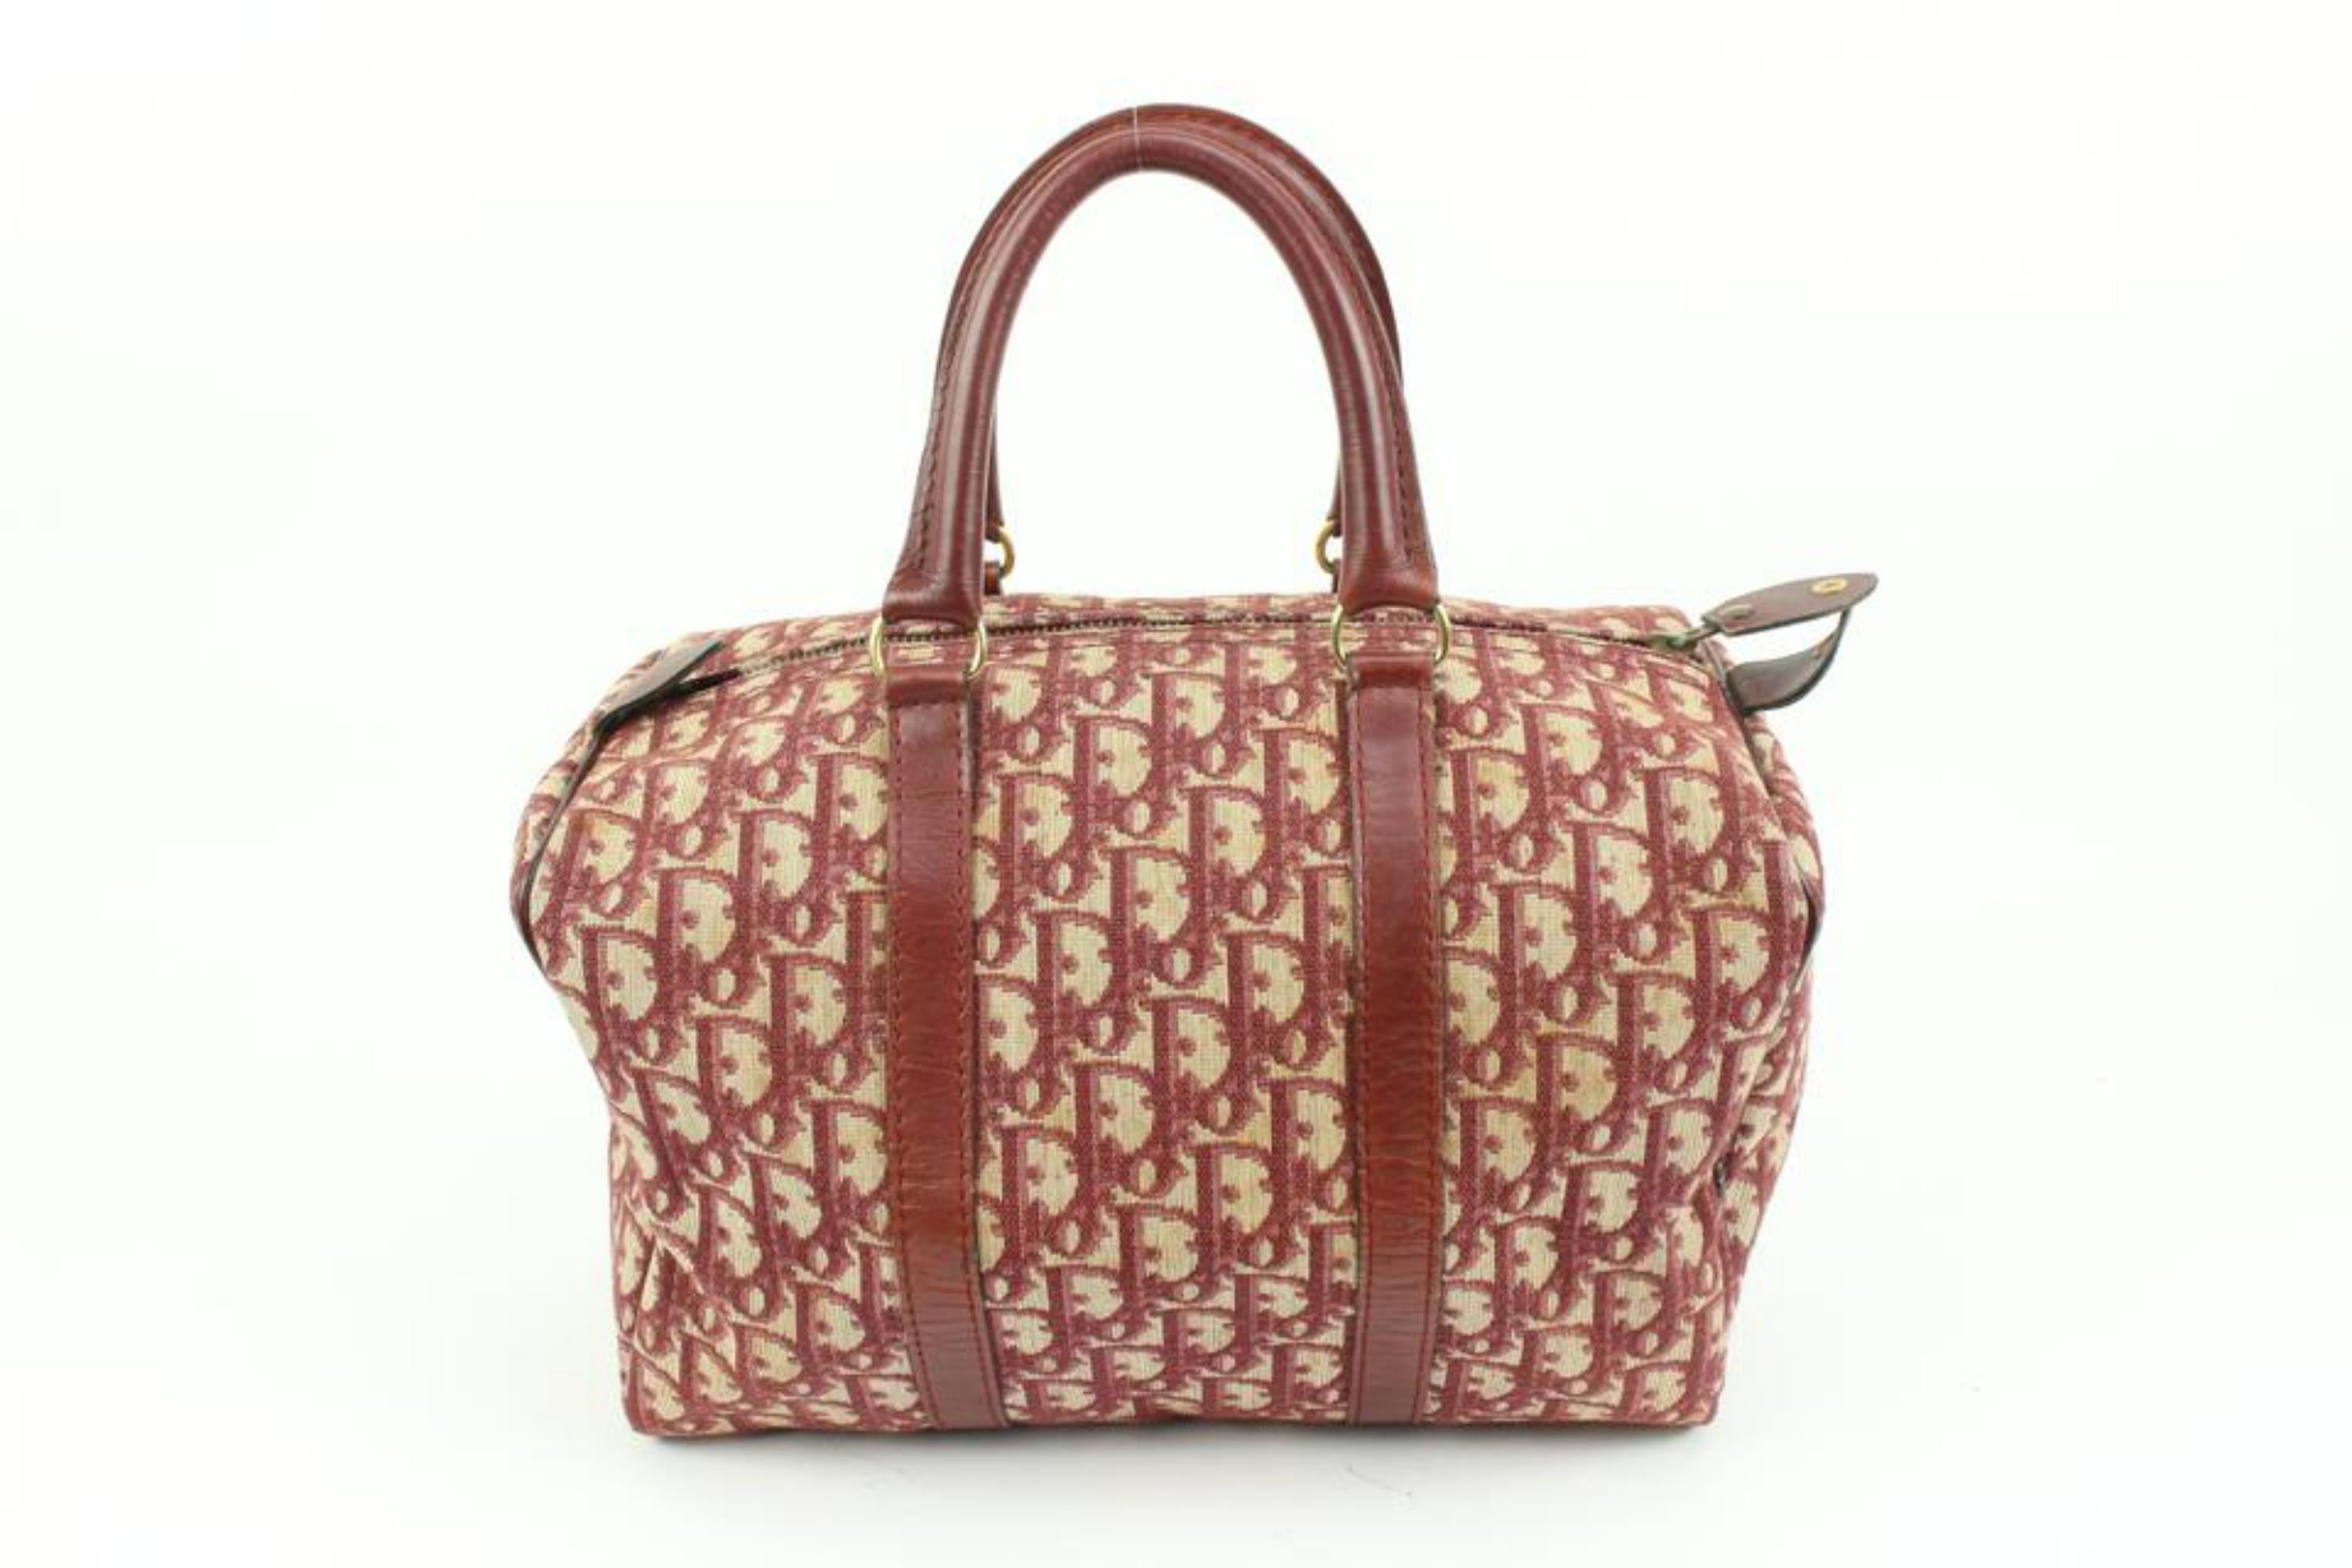 Dior Dark Red Burgundy Bordeaux Monogram Trotter Boston Bag 61d418s In Good Condition For Sale In Dix hills, NY